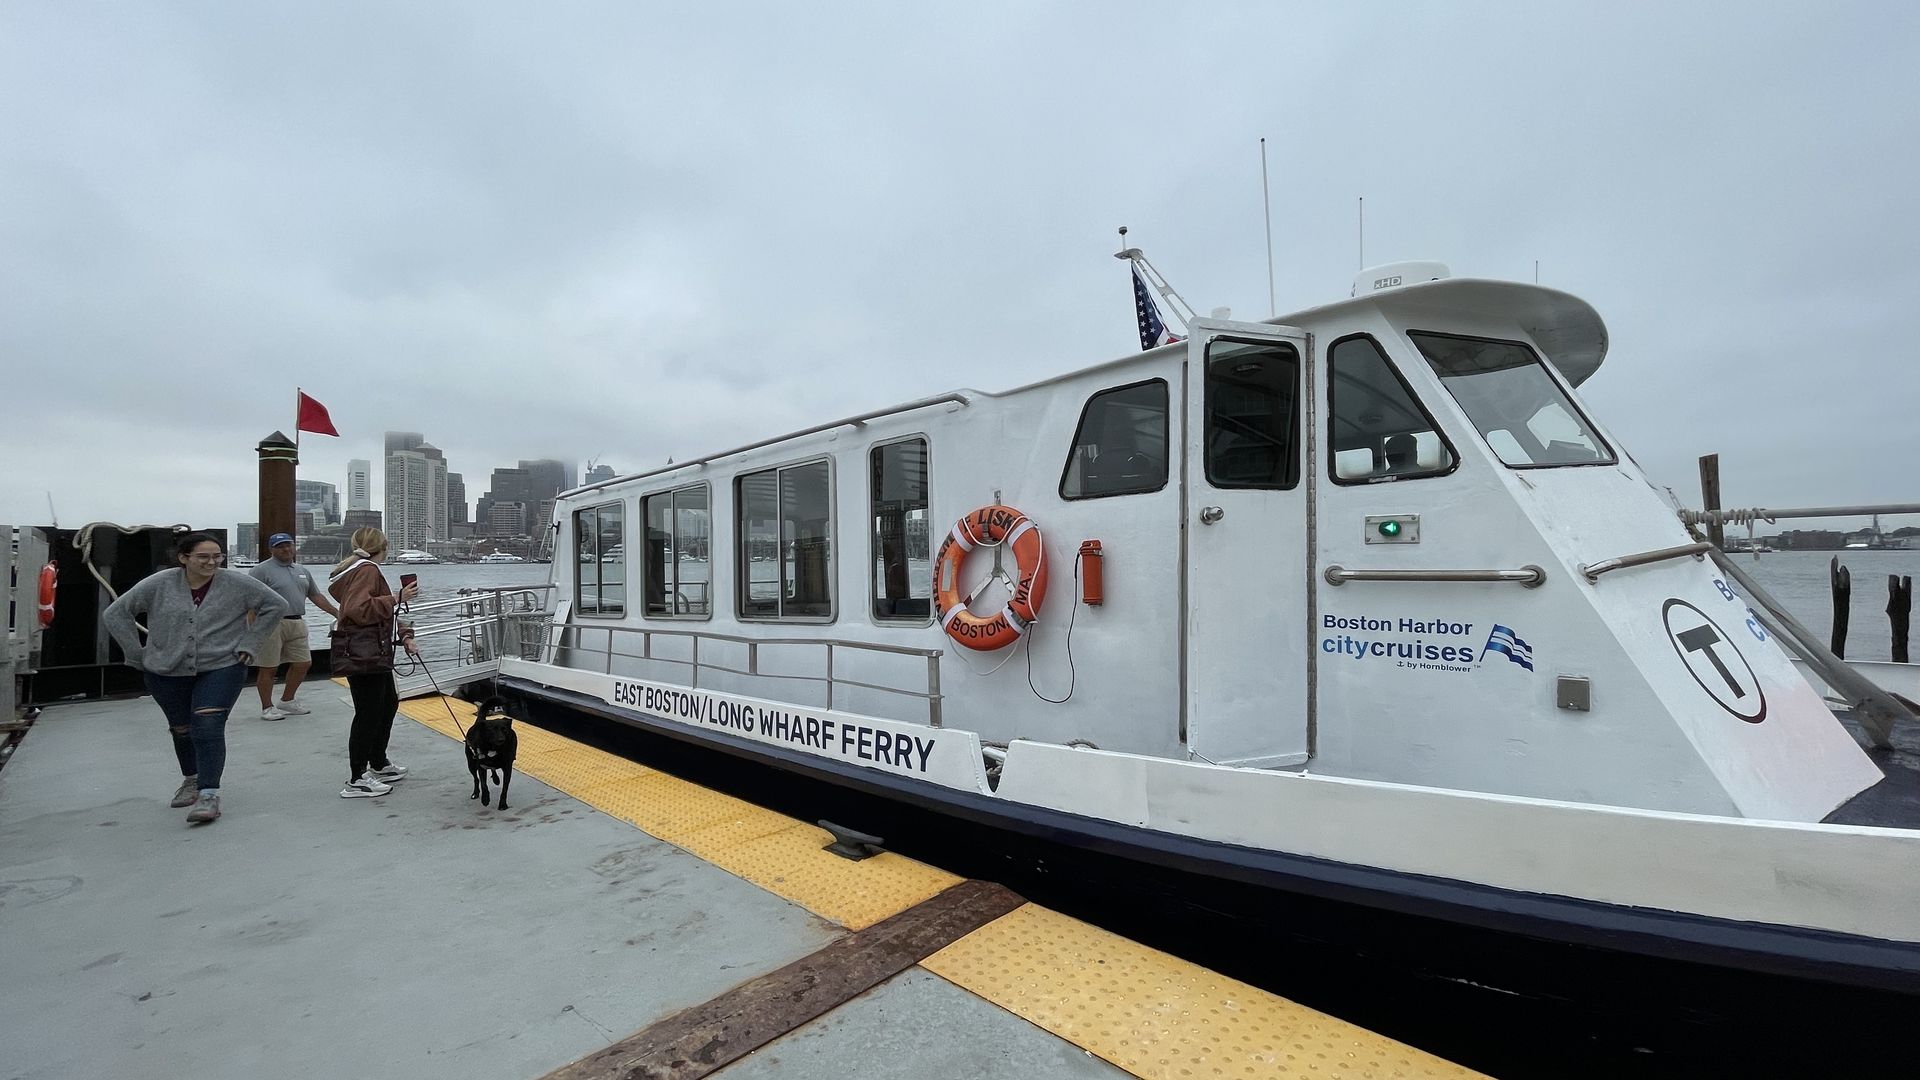 The East Boston ferry lands at a pier in Eastie, and a transit employee moves the ramp off the pier onto the train after two passengers and a dog get off.